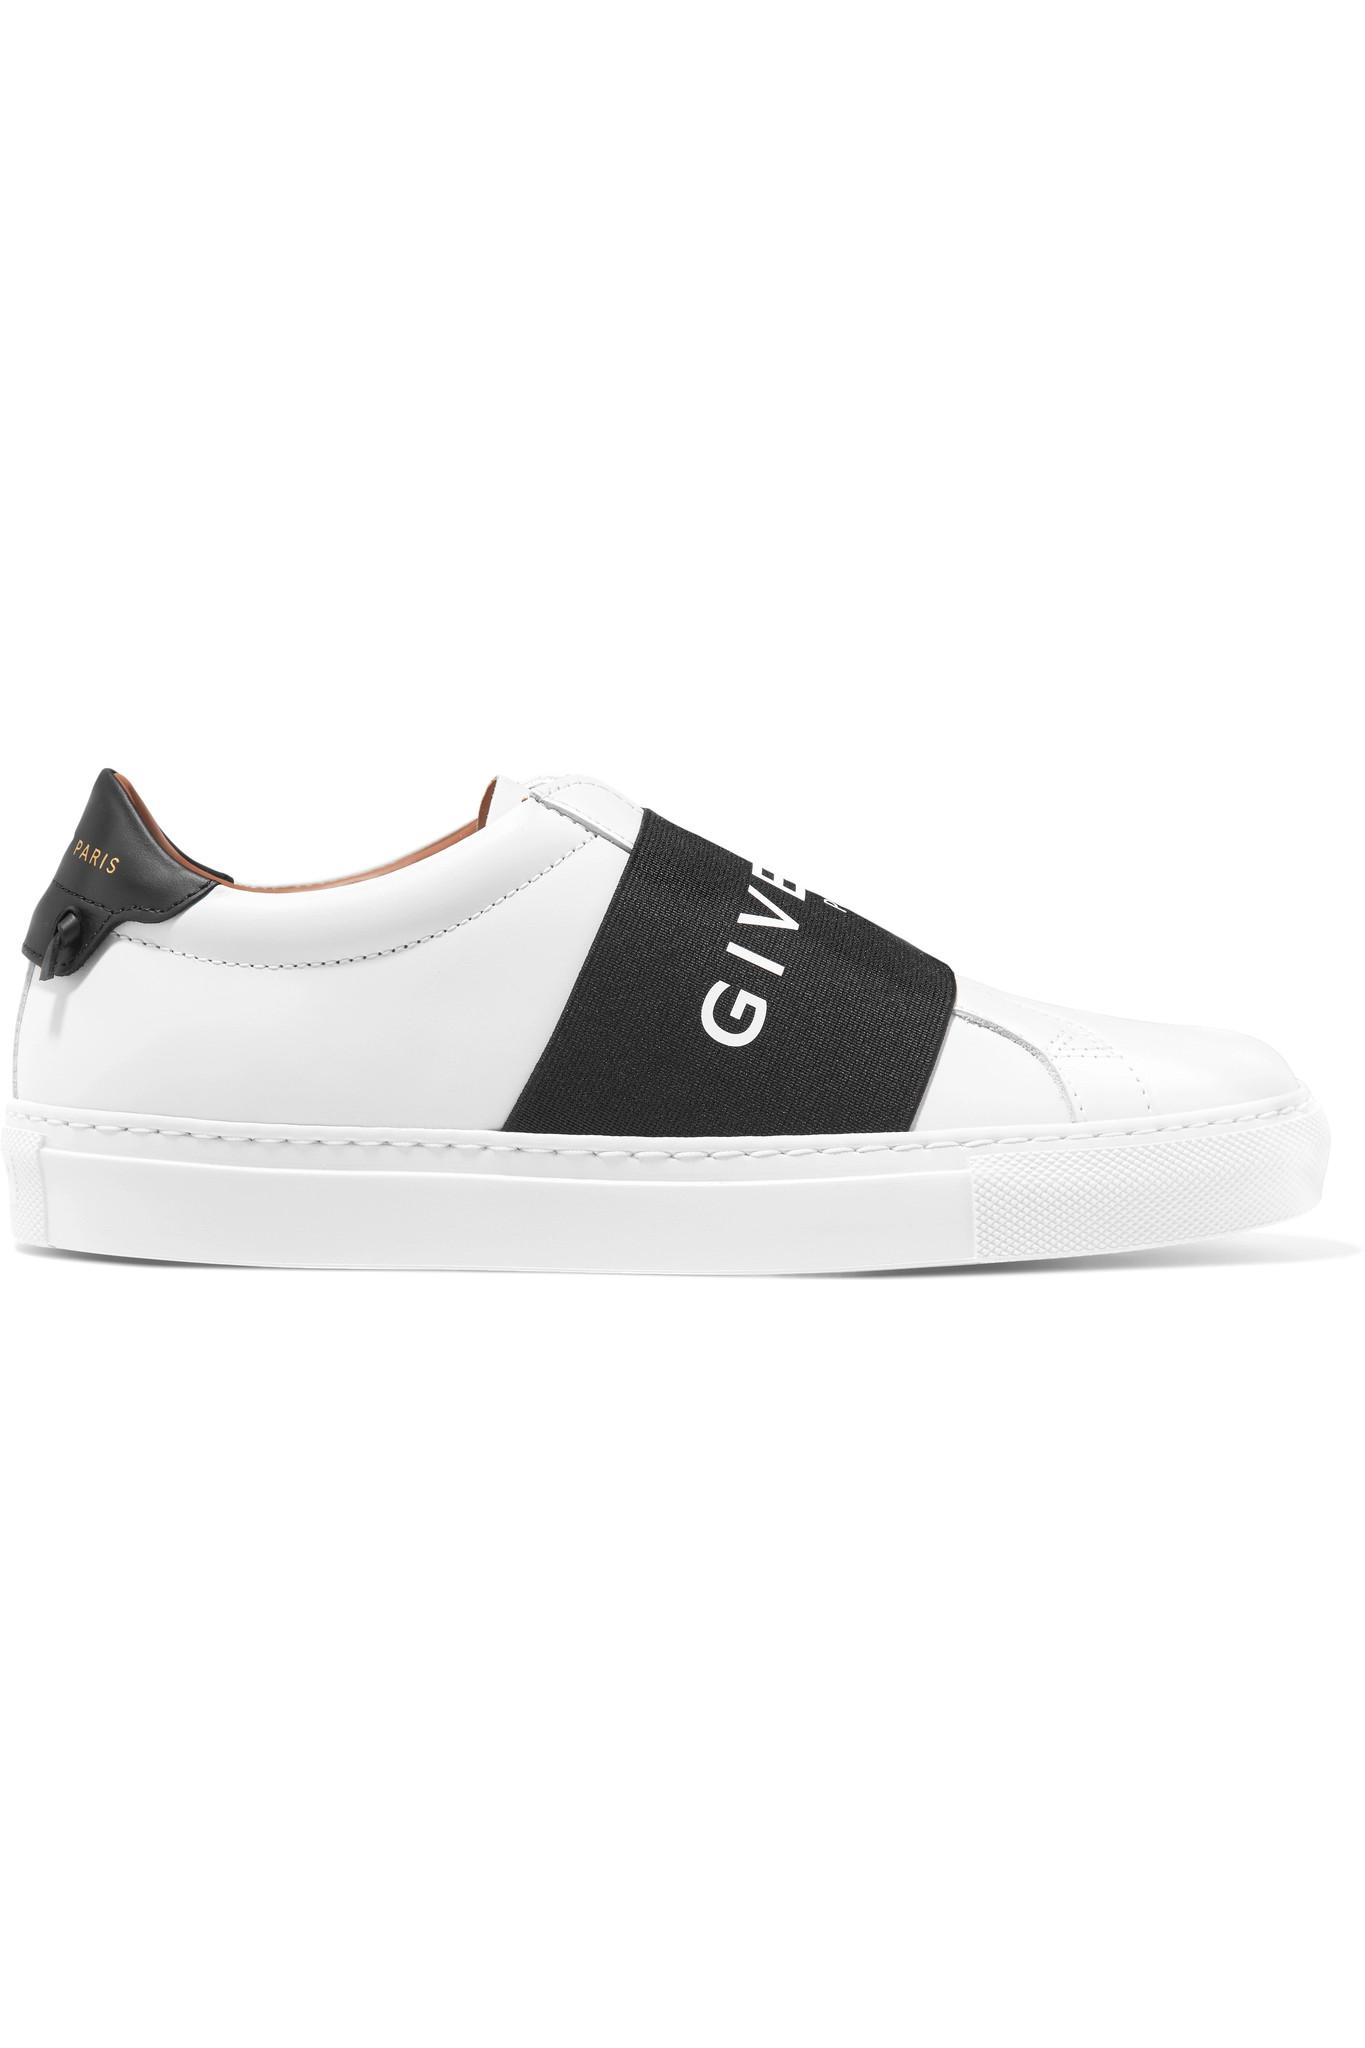 Lyst - Givenchy Urban Street Logo-print Leather Slip-on Sneakers in ...